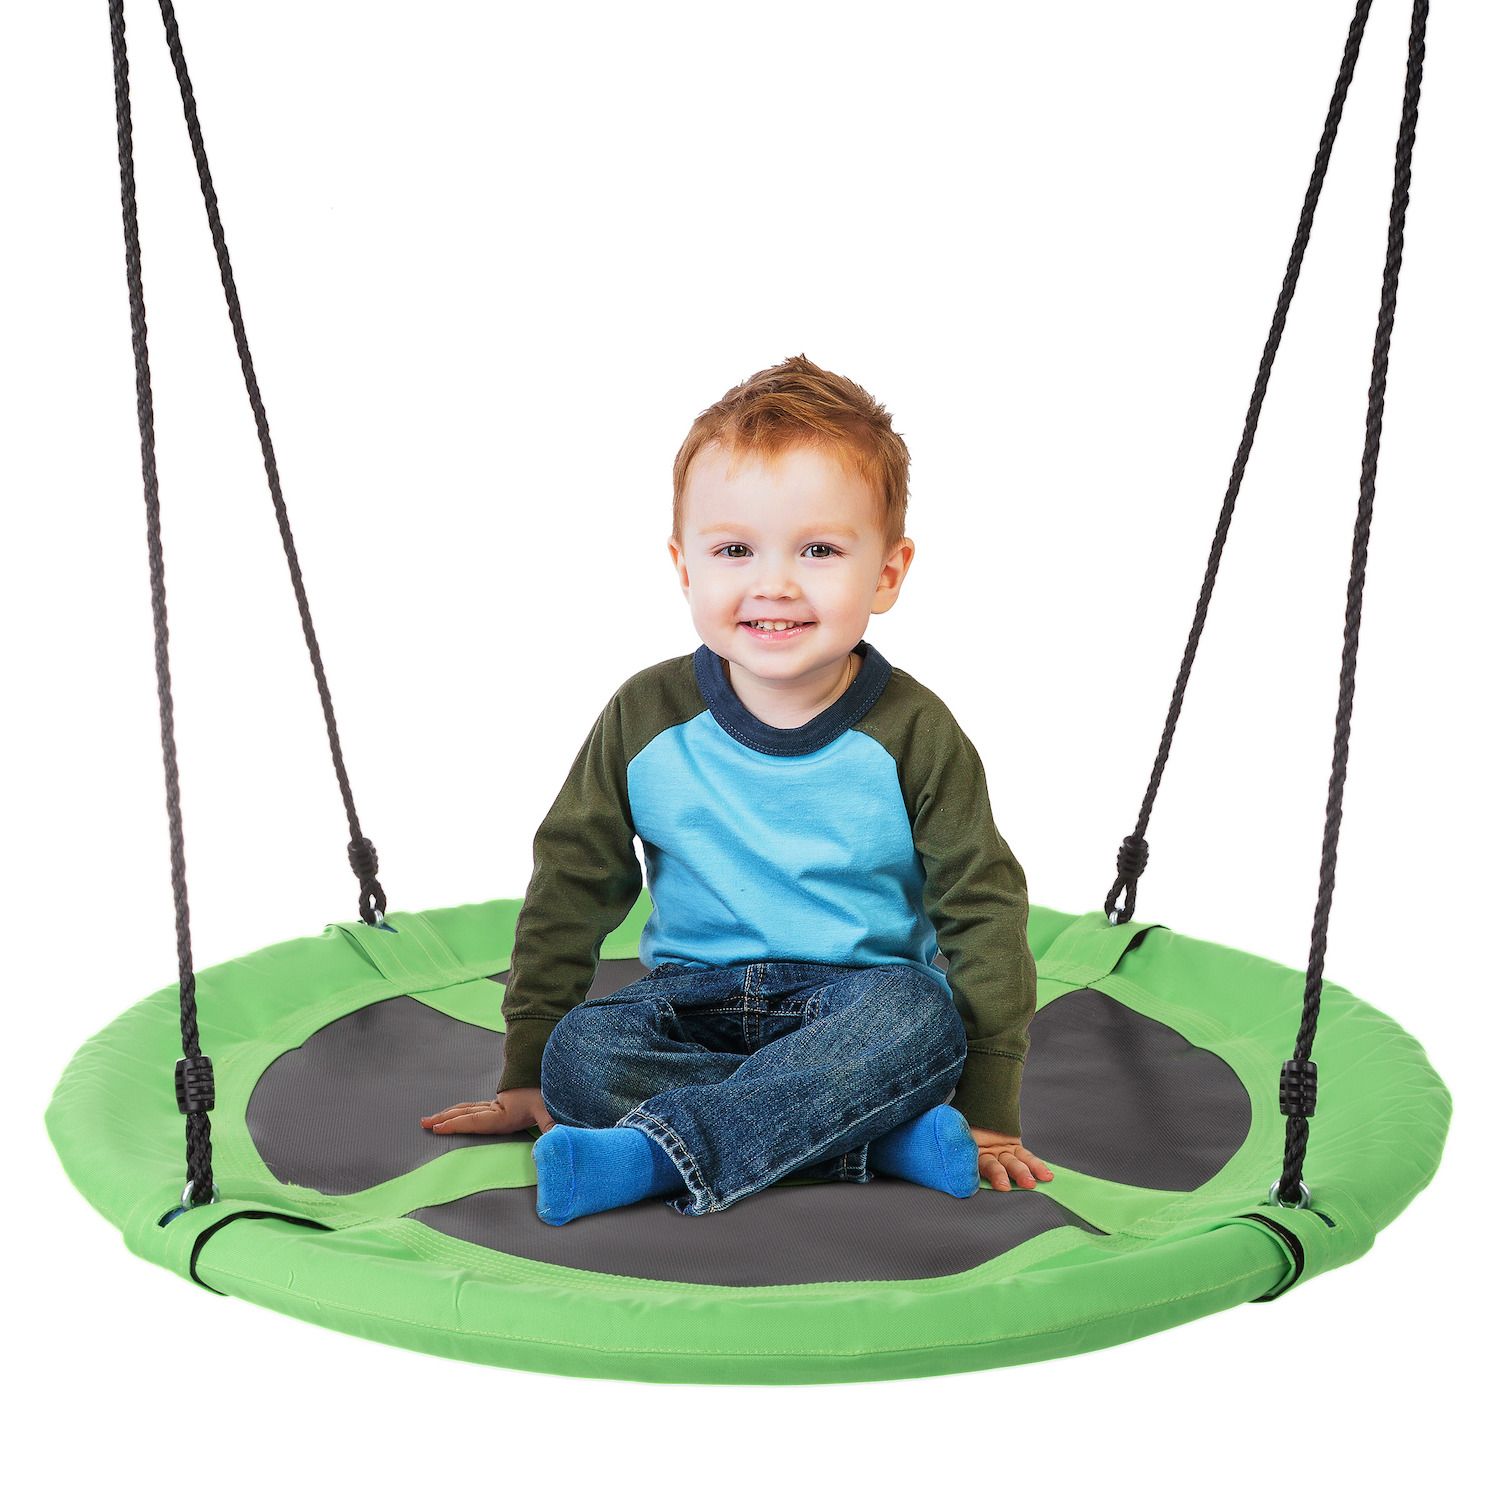 Image for Hey! Play! 40-Inch Diameter Round Disk Hanging Tree Swing at Kohl's.